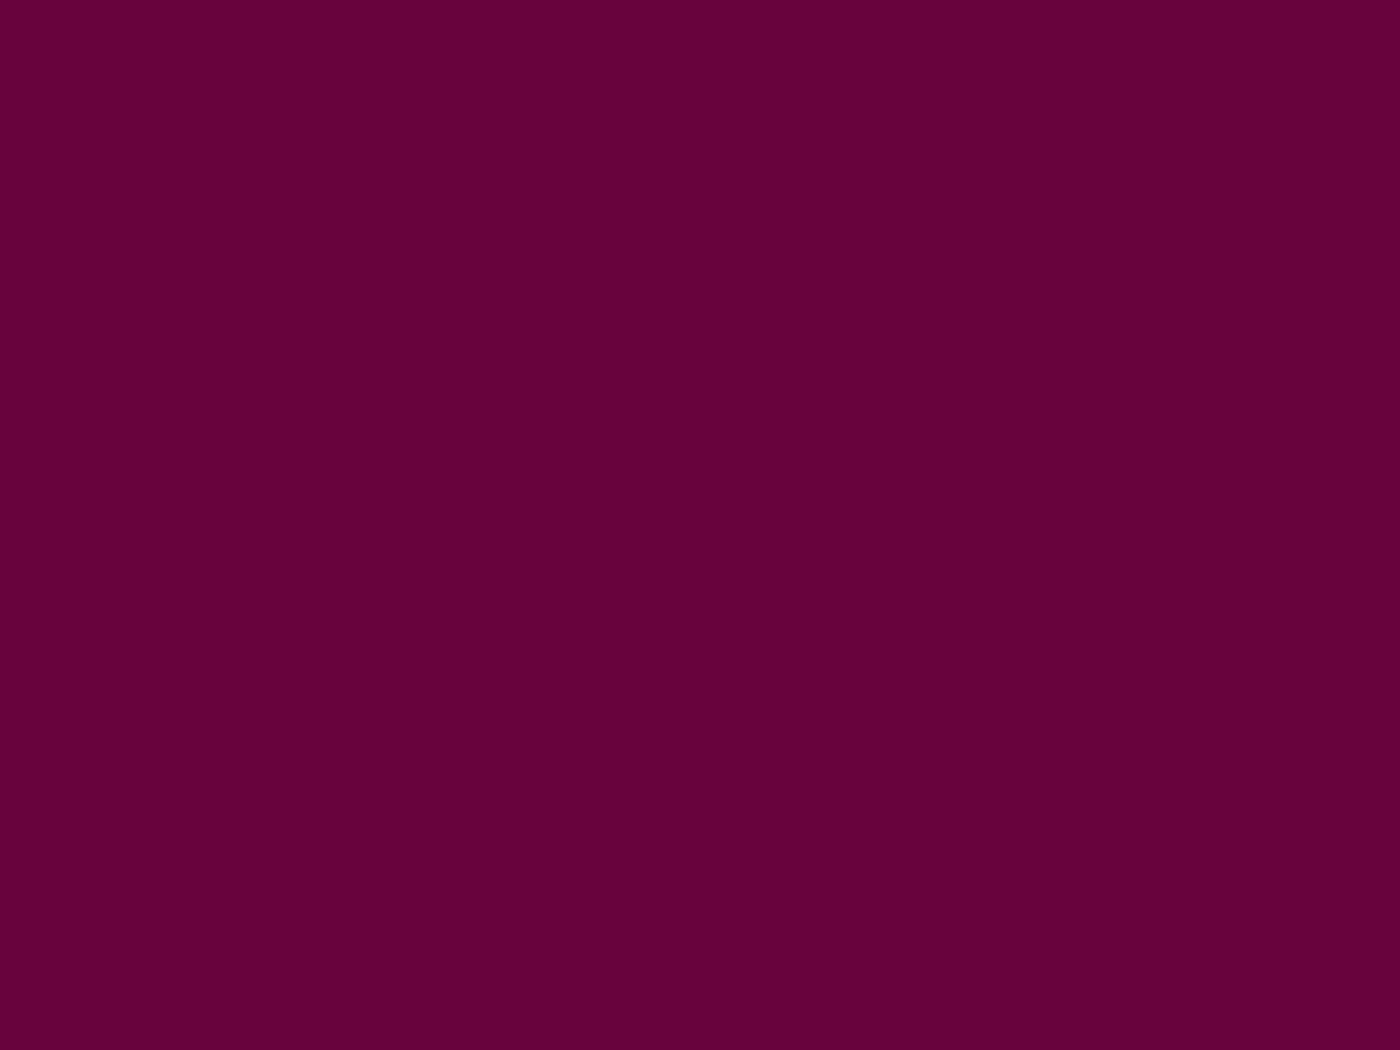 1400x1050 Imperial Purple Solid Color Background